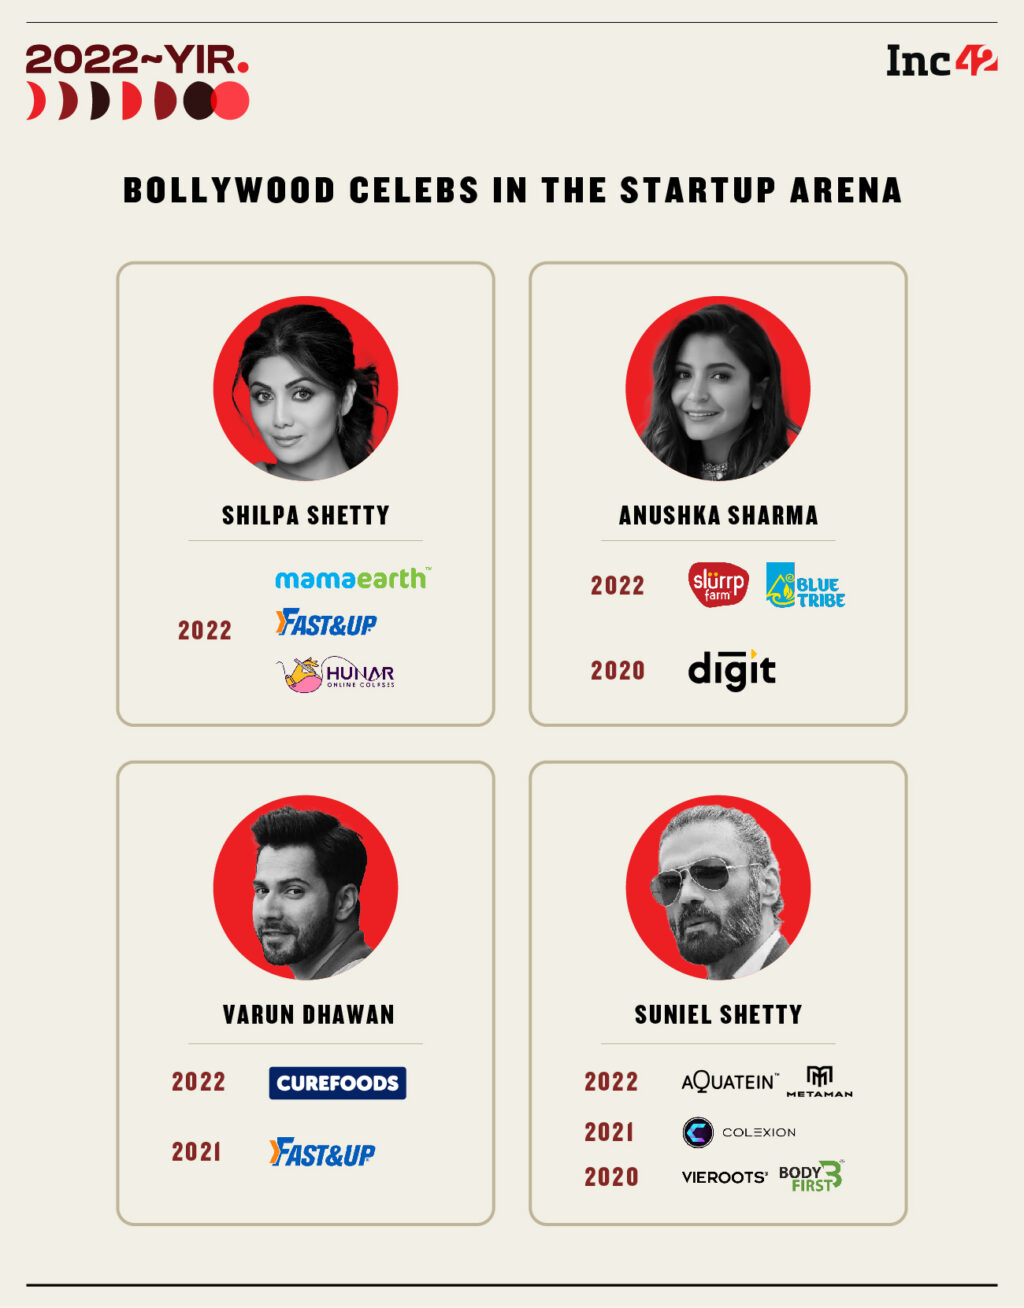 Bollywood Celebrities Turn Investors With An Eye On India’s Startup Boom